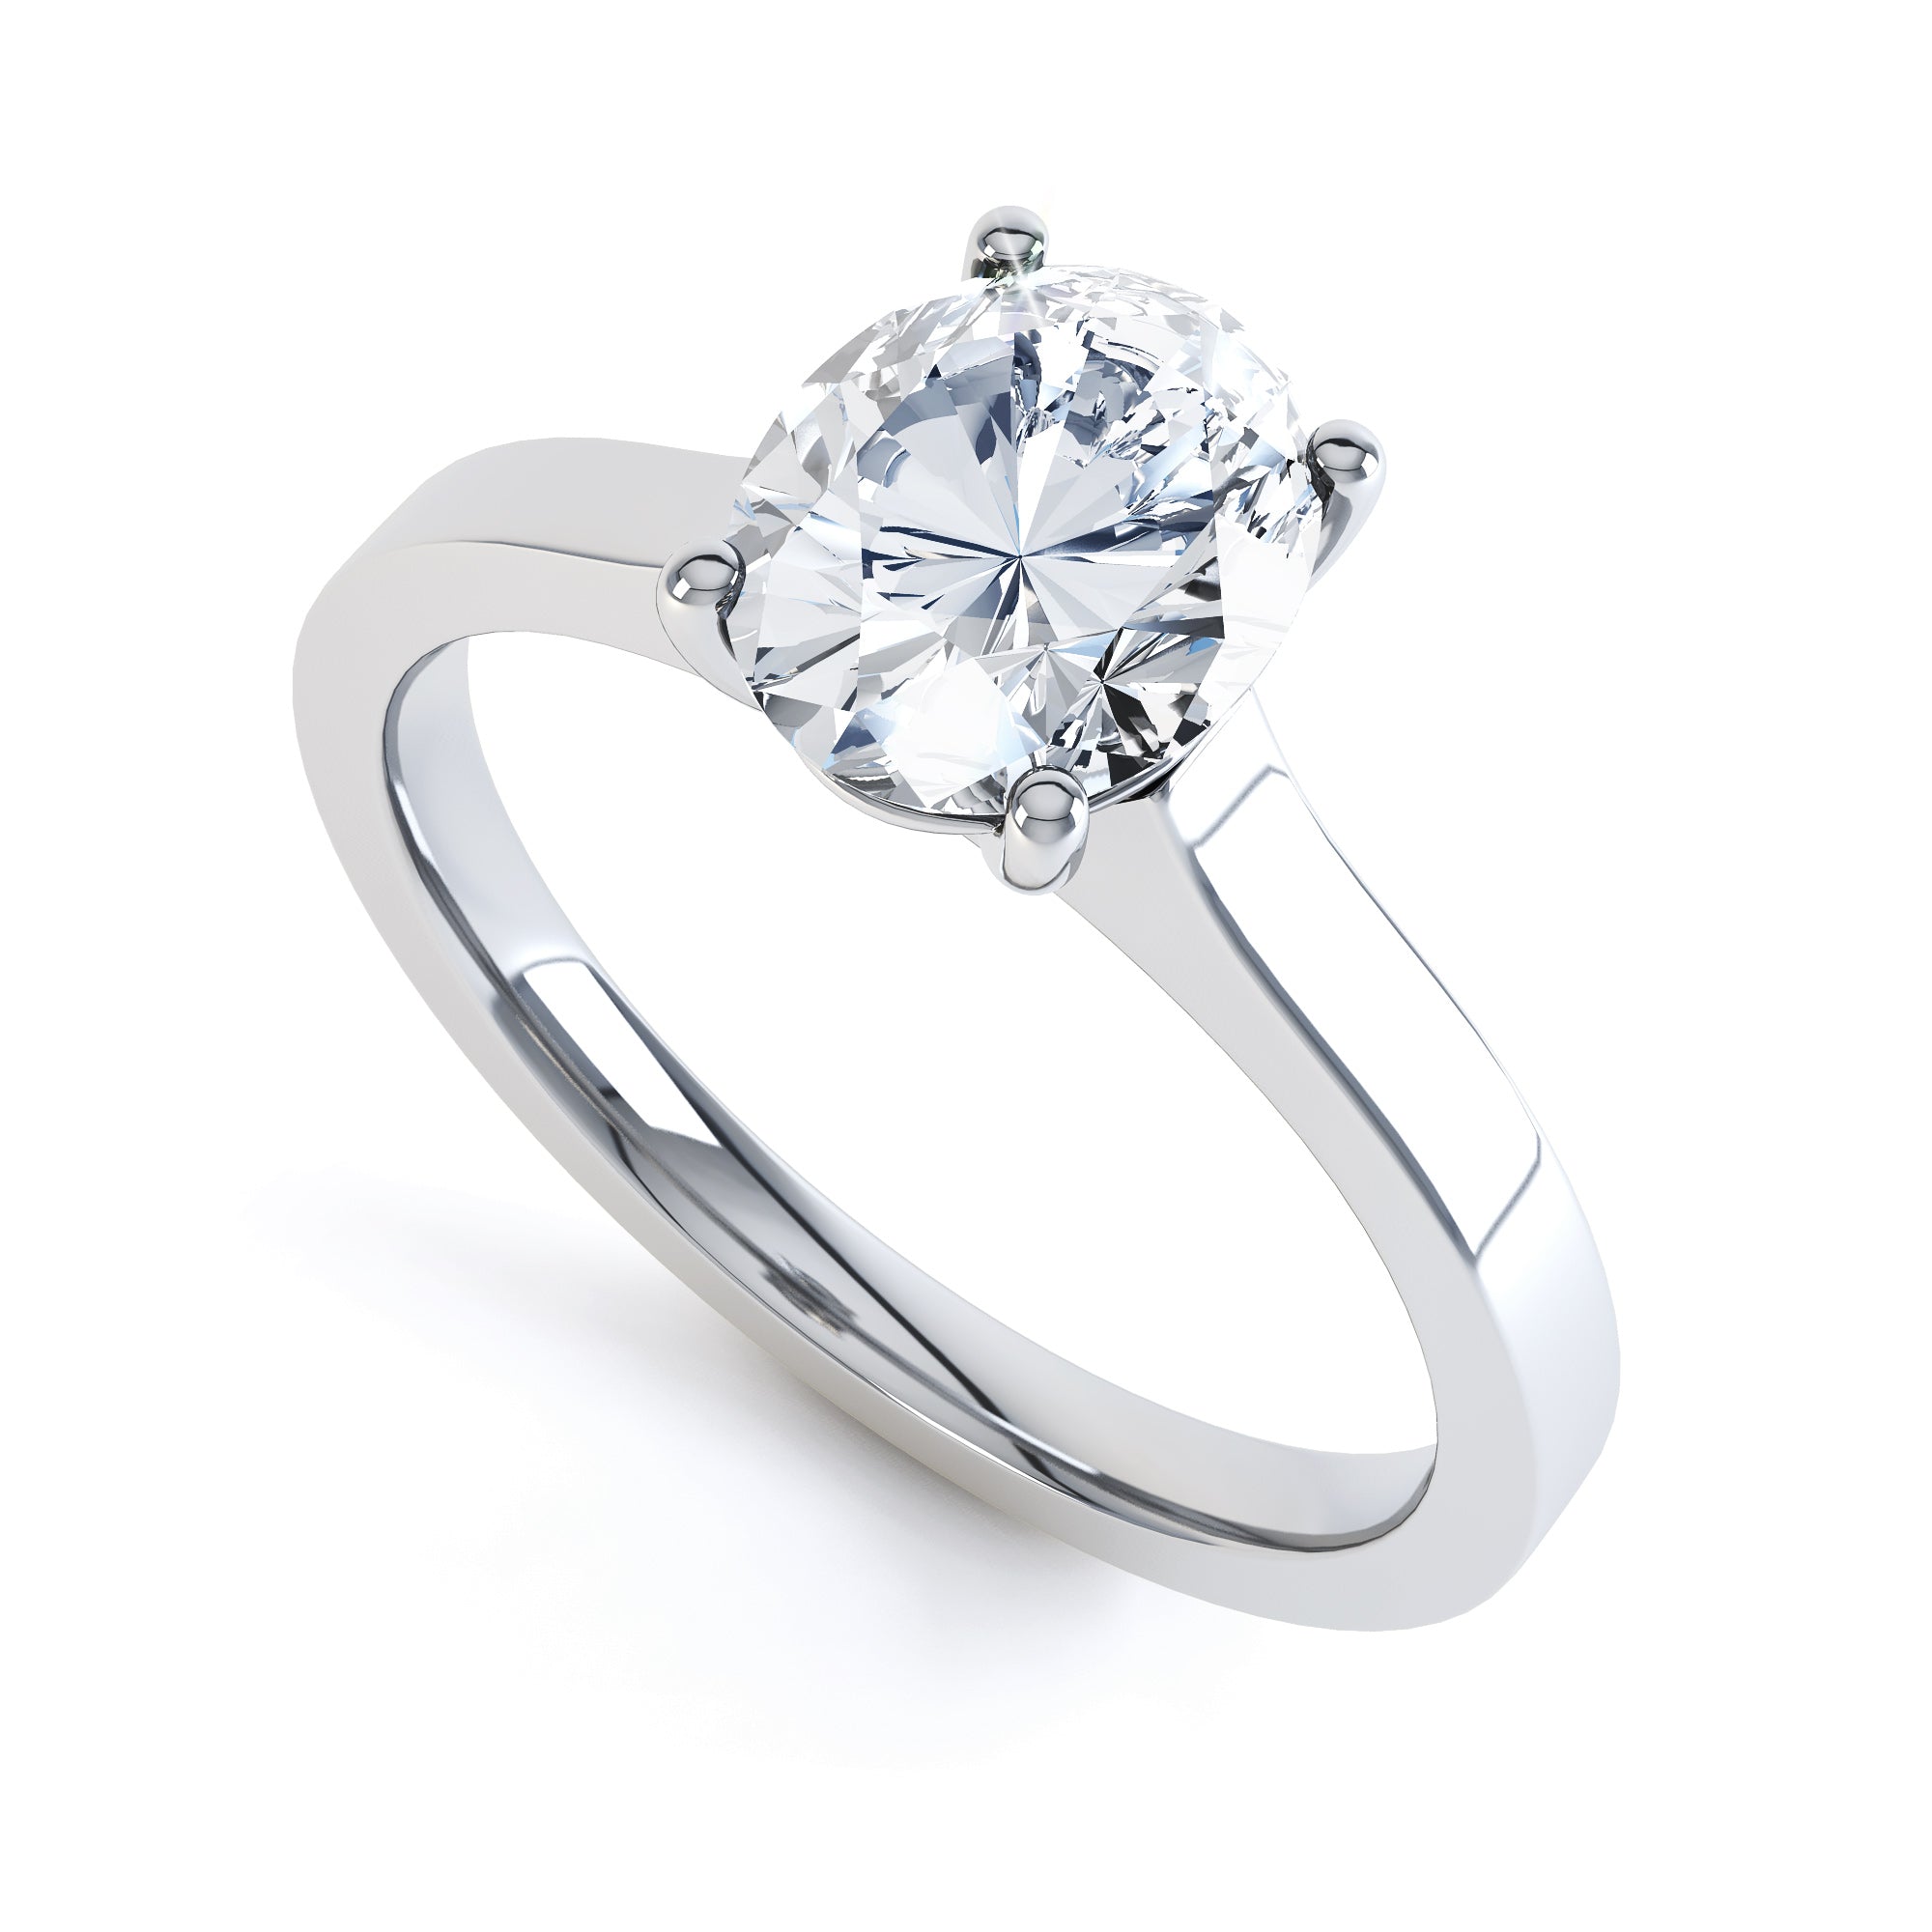 Oval Cut Centre Stone, 4 claw set, Diamond Engagement Ring with Parrallel Shoulders